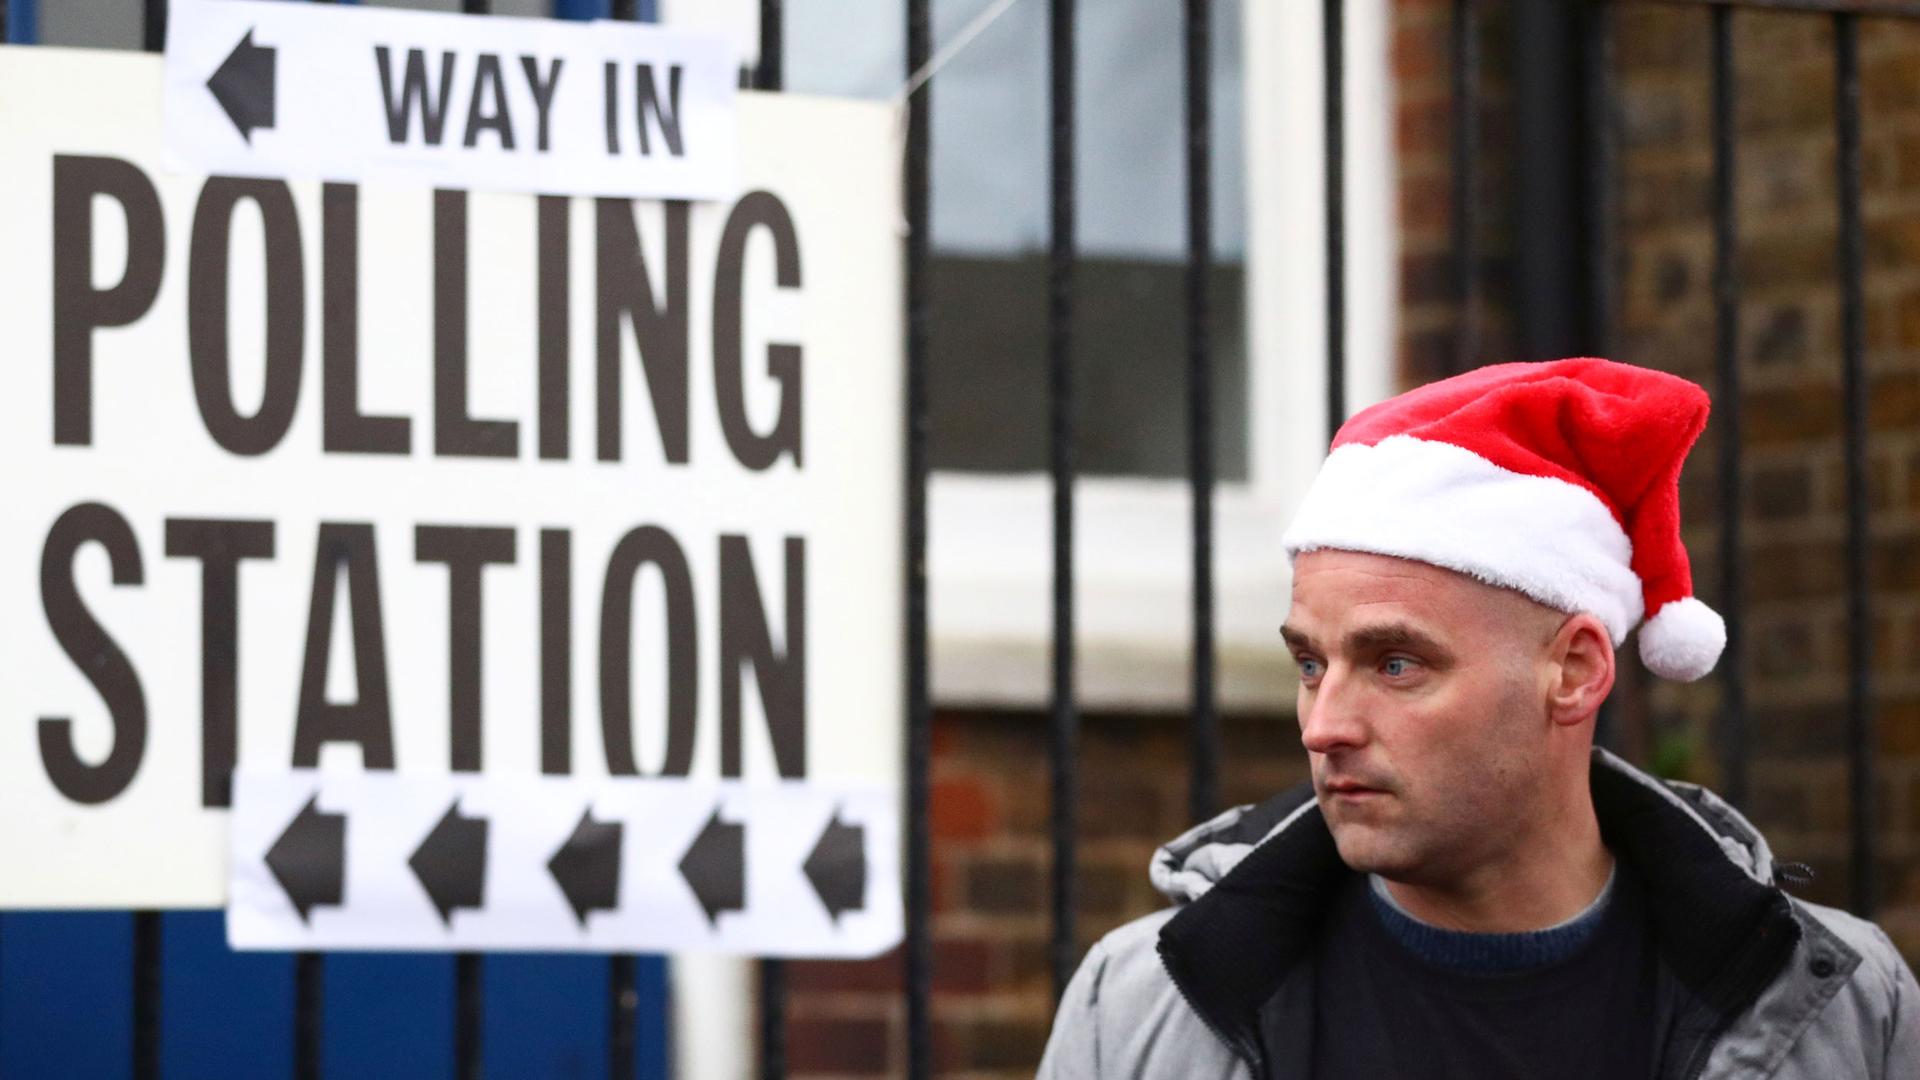 A man is shown wearing a red and white Santa Claus hat and standing next to a white sign with the words 'polling station' printed on it.